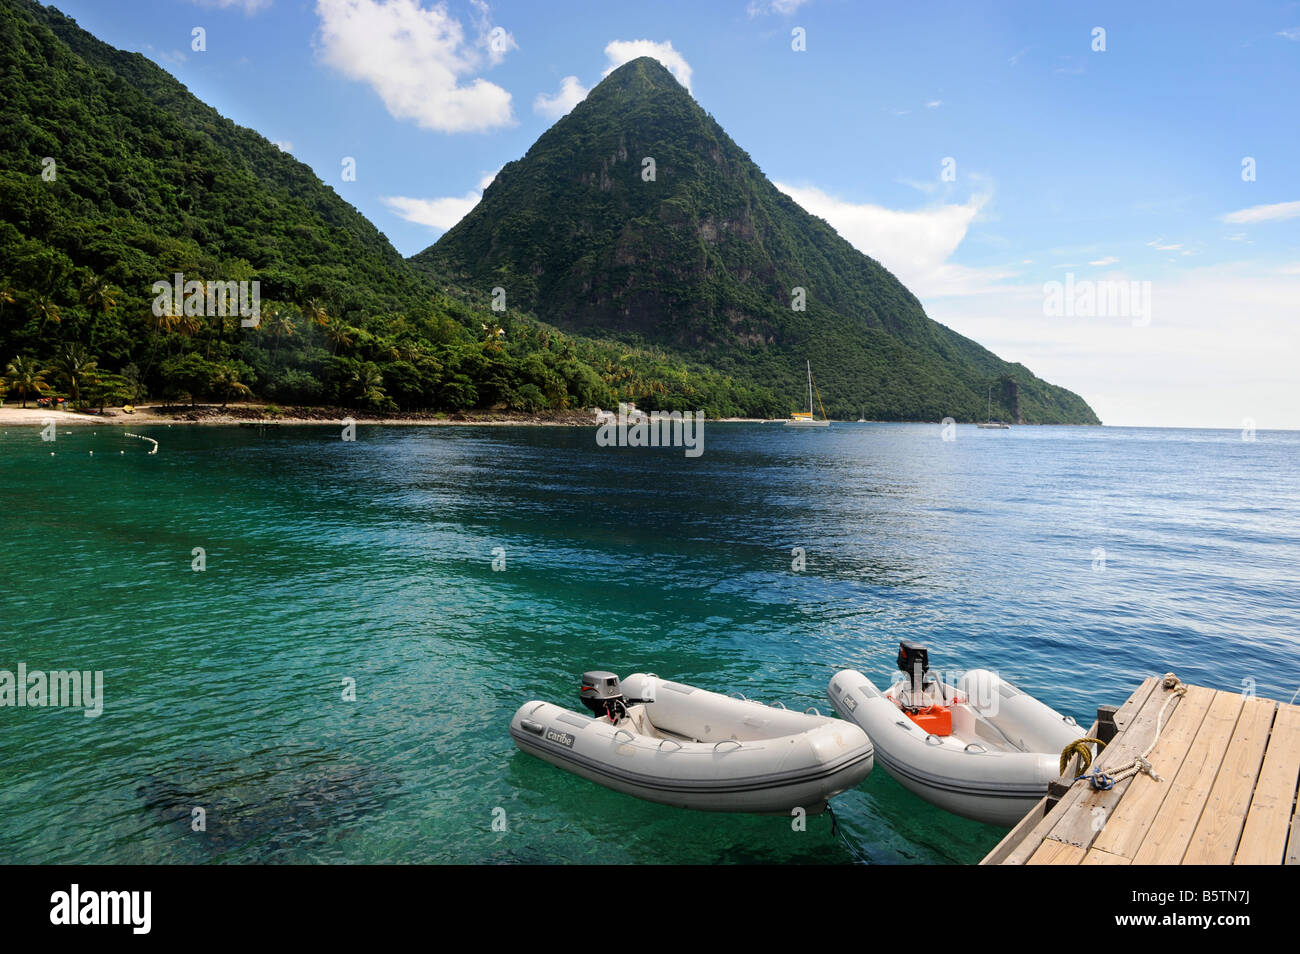 A VIEW OF THE MOUNTAIN GROS PITON FROM FORBIDDEN BEACH AT THE JALOUSIE PLANTATION RESORT ST LUCIA Stock Photo